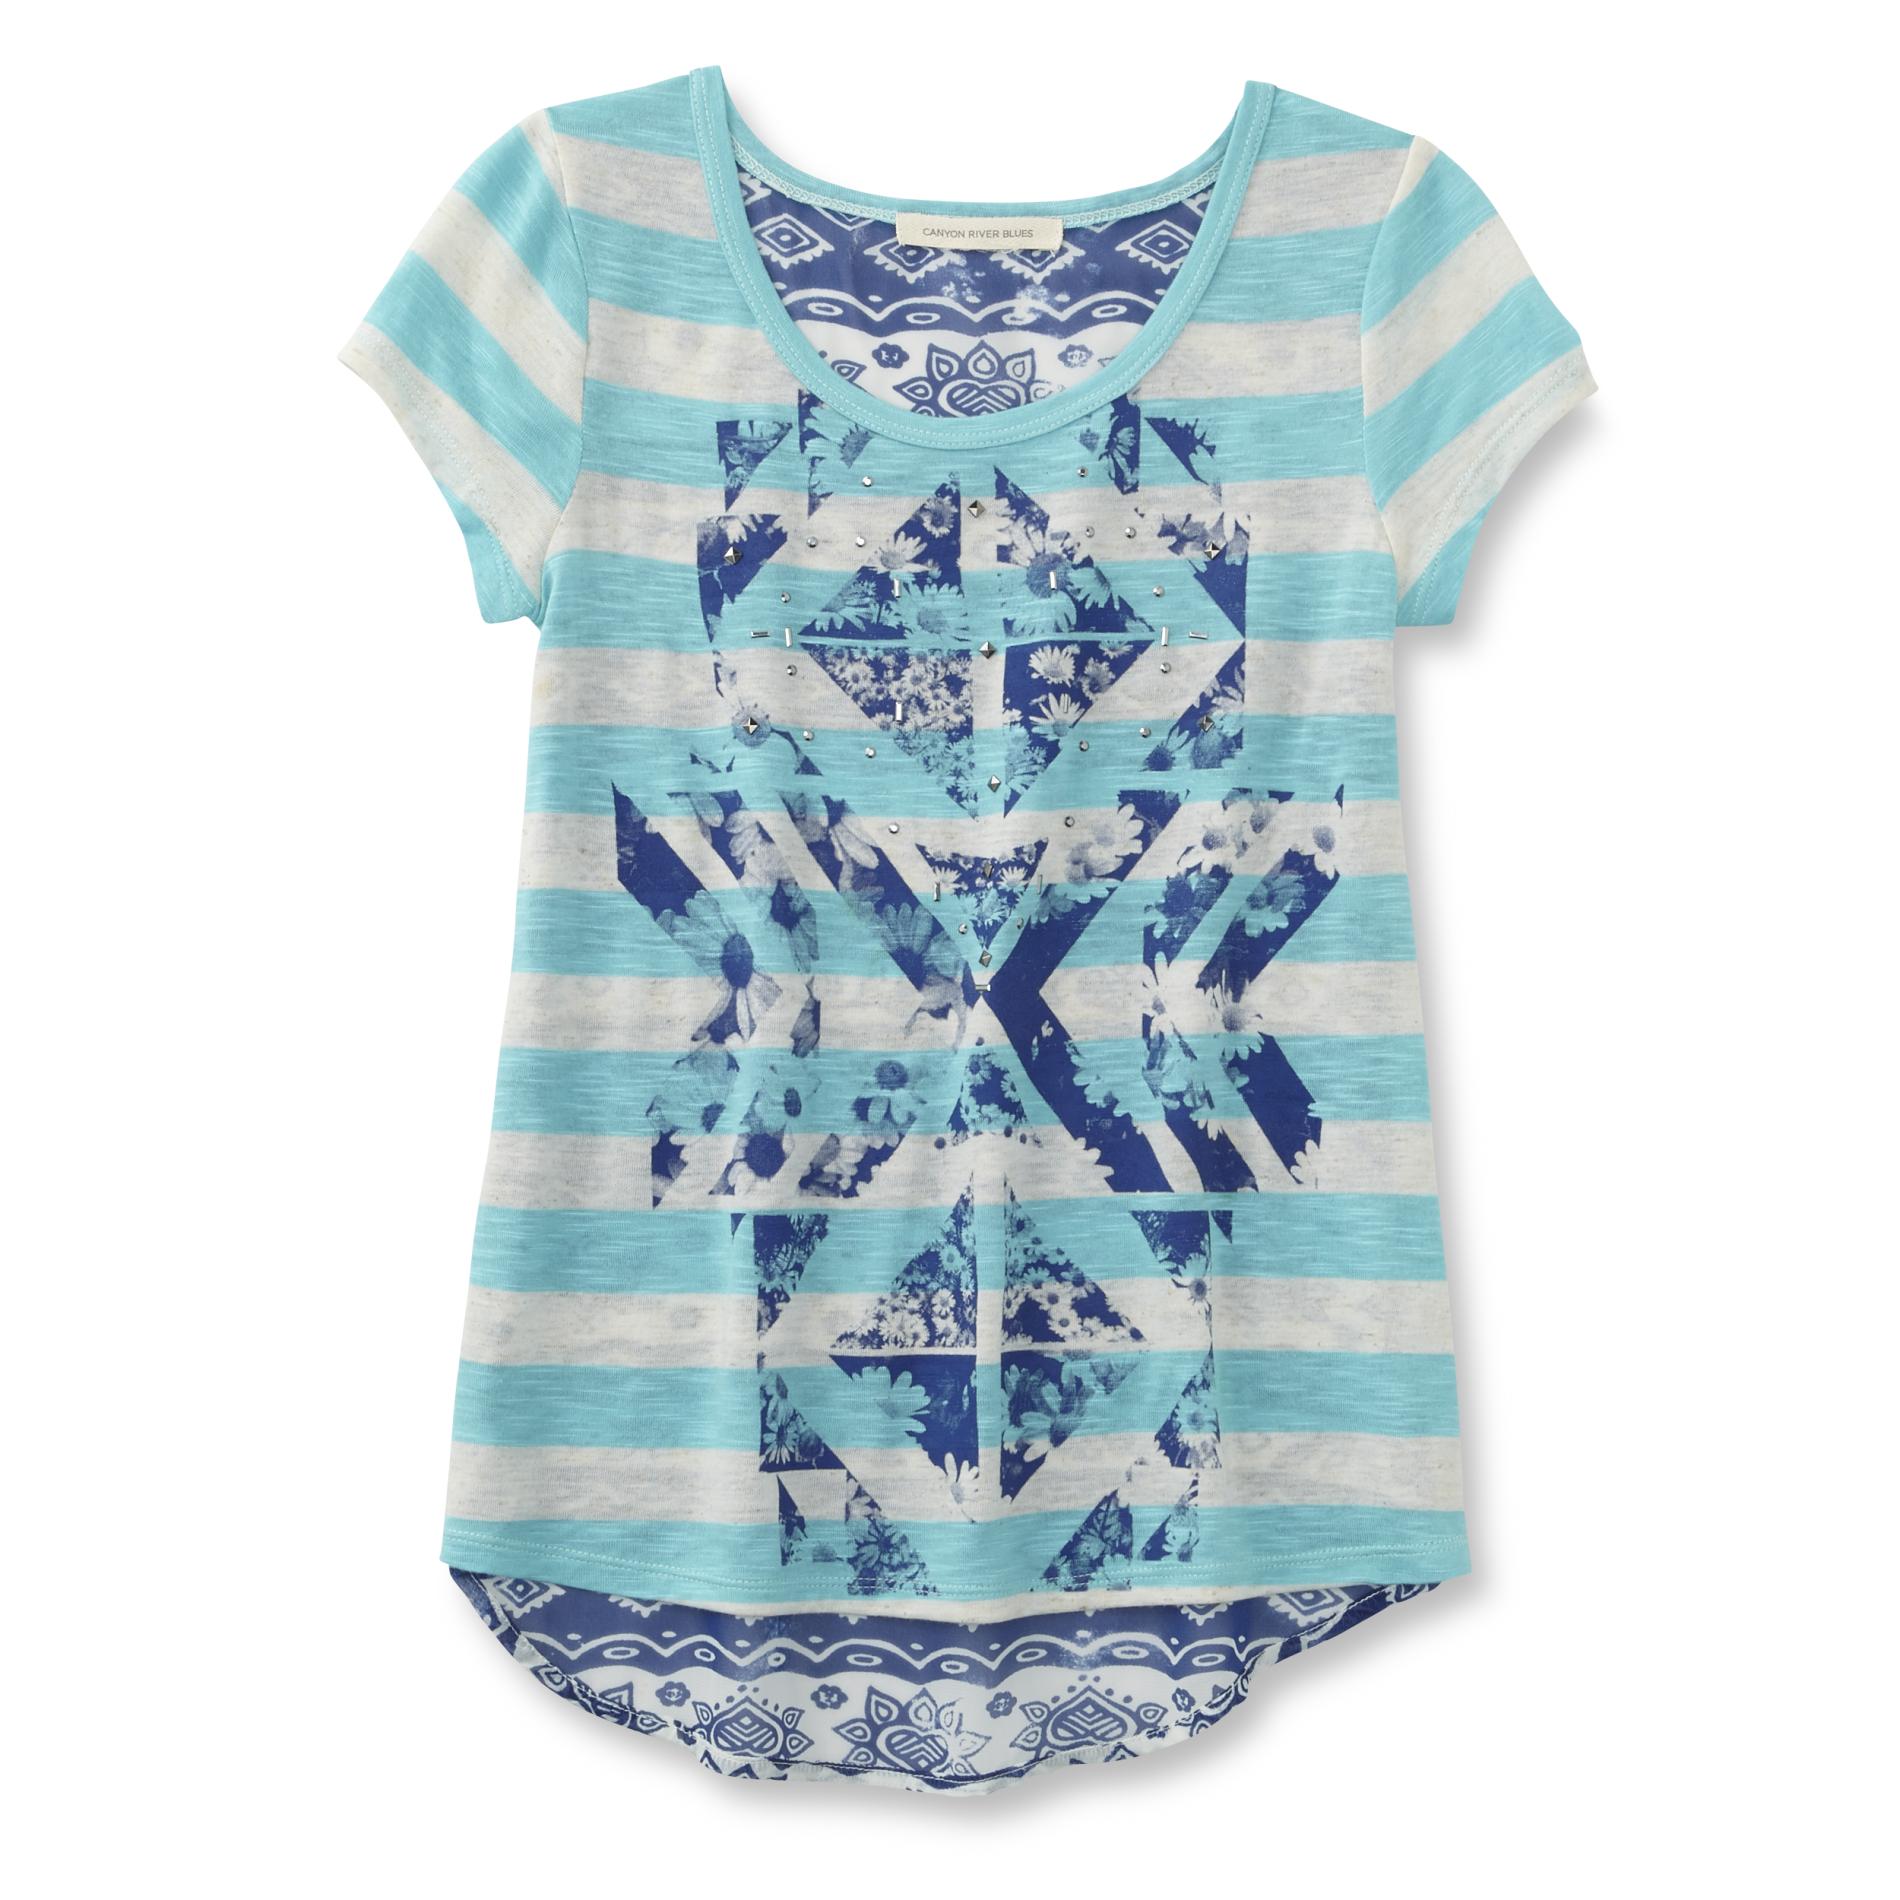 Girl's Graphic T-Shirt - Striped